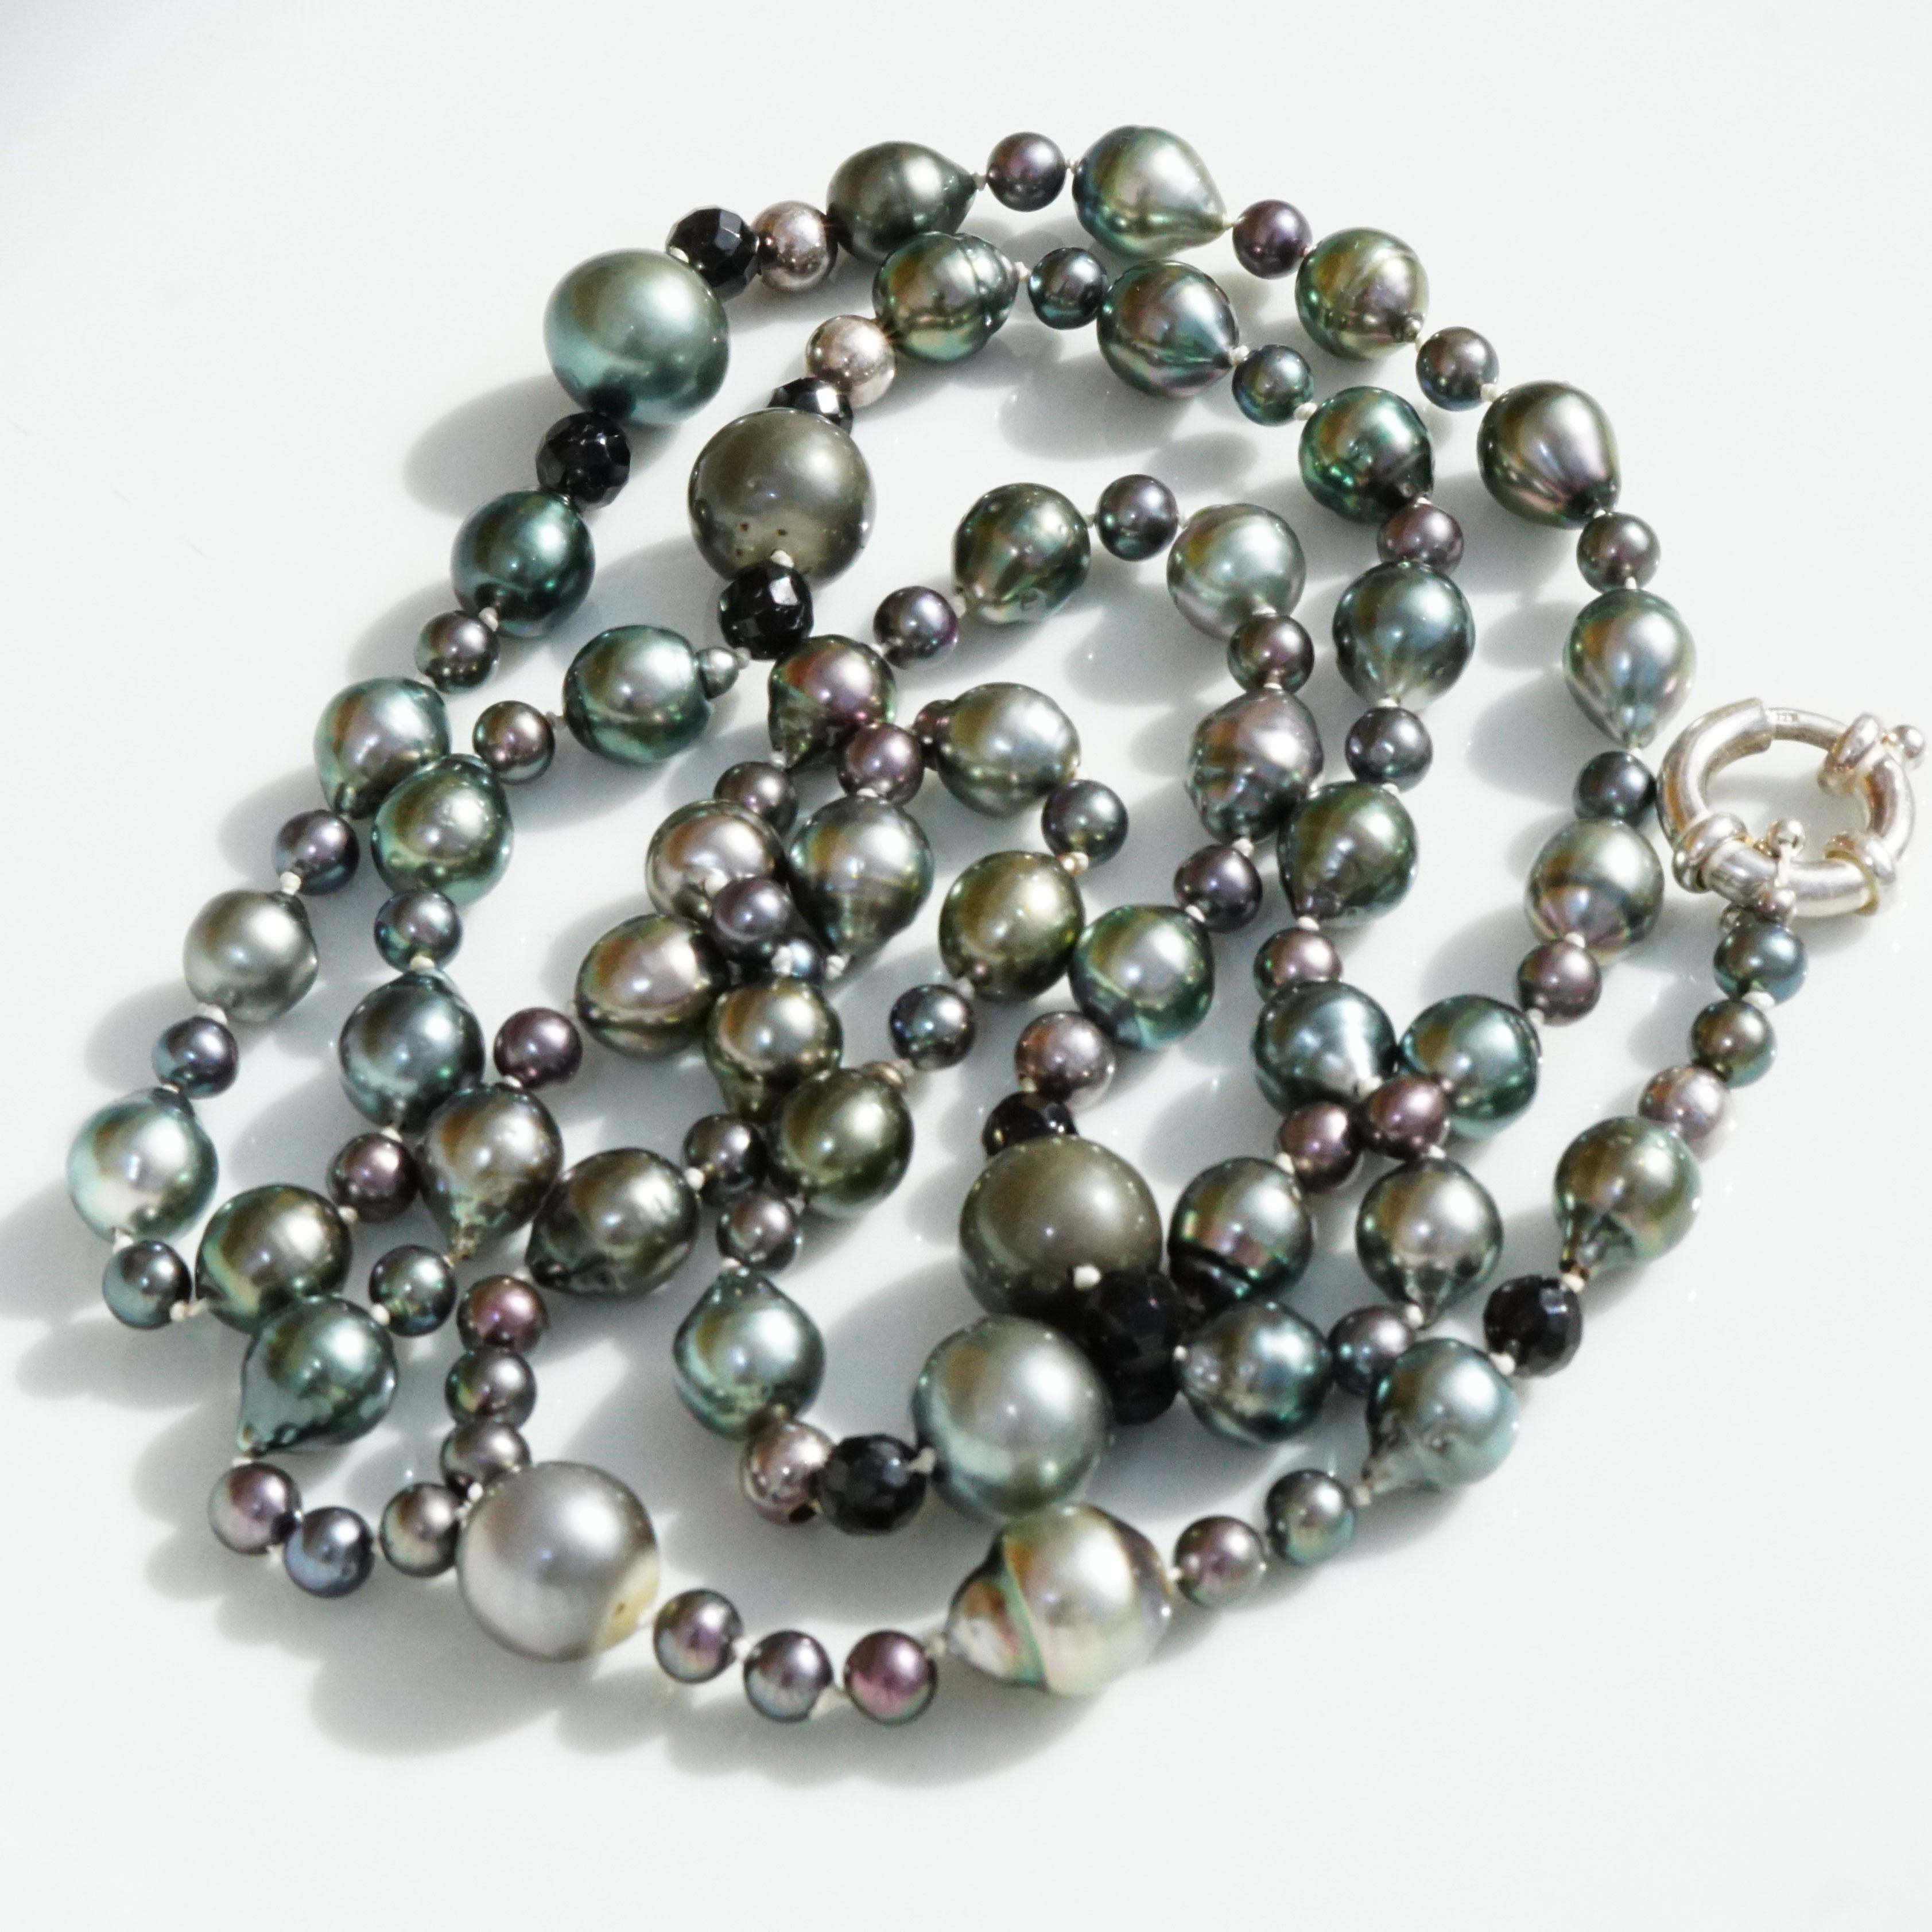 Modern Tahiti Pearl Chain with Changeable Interchangeable Pendant Rosary